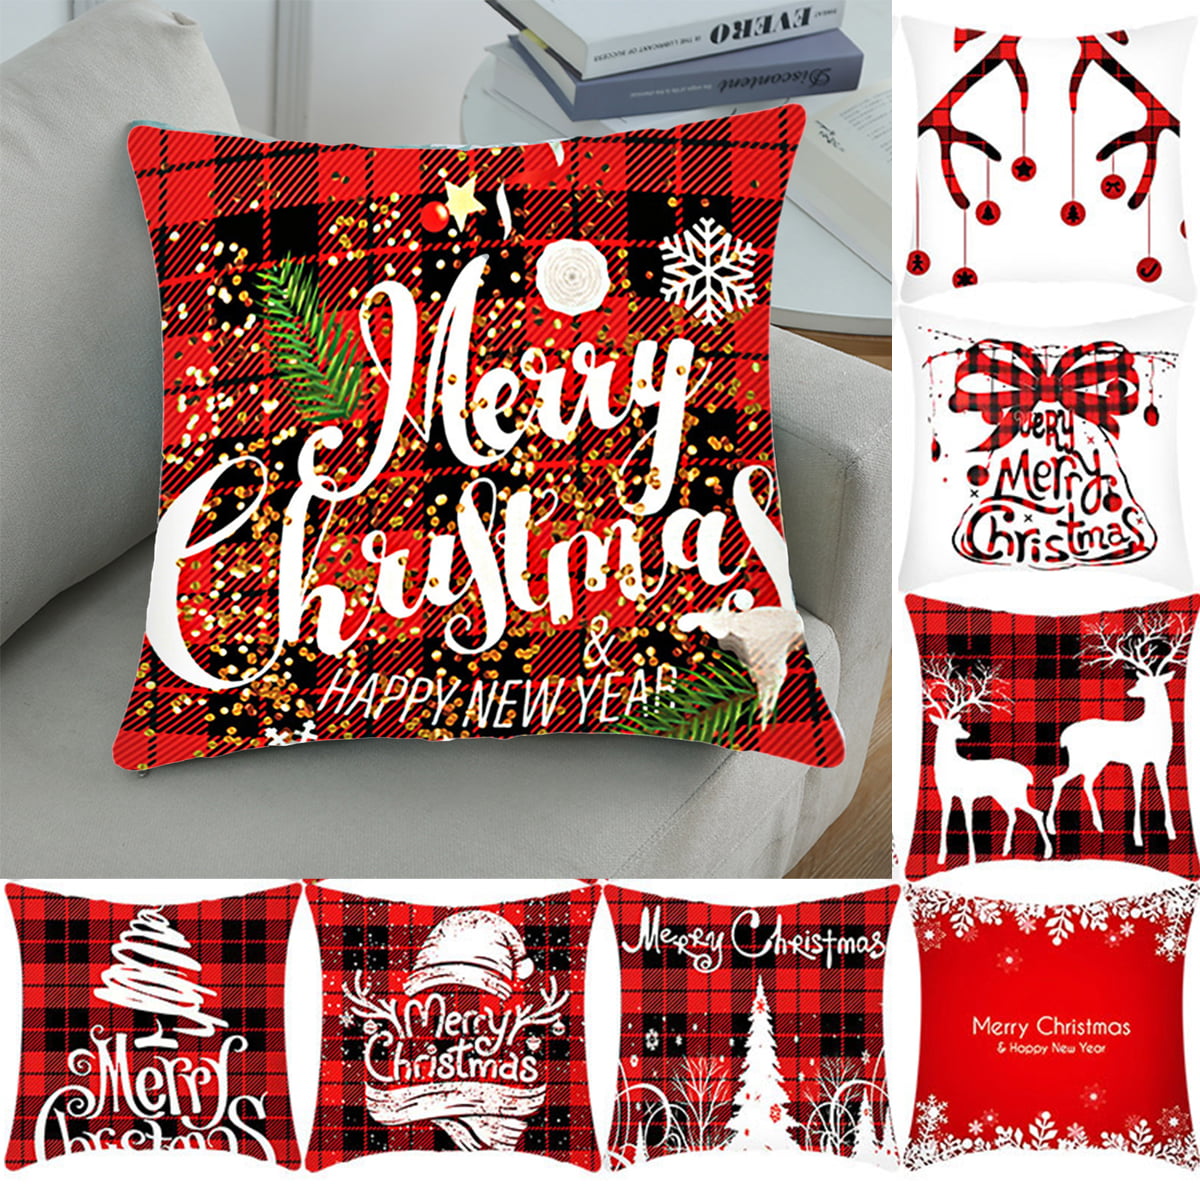 18 x 18 Inch Winter Holiday Party Cushion Case Decoration for Sofa Couch AVOIN colorlife Christmas Believe Throw Pillow Cover 